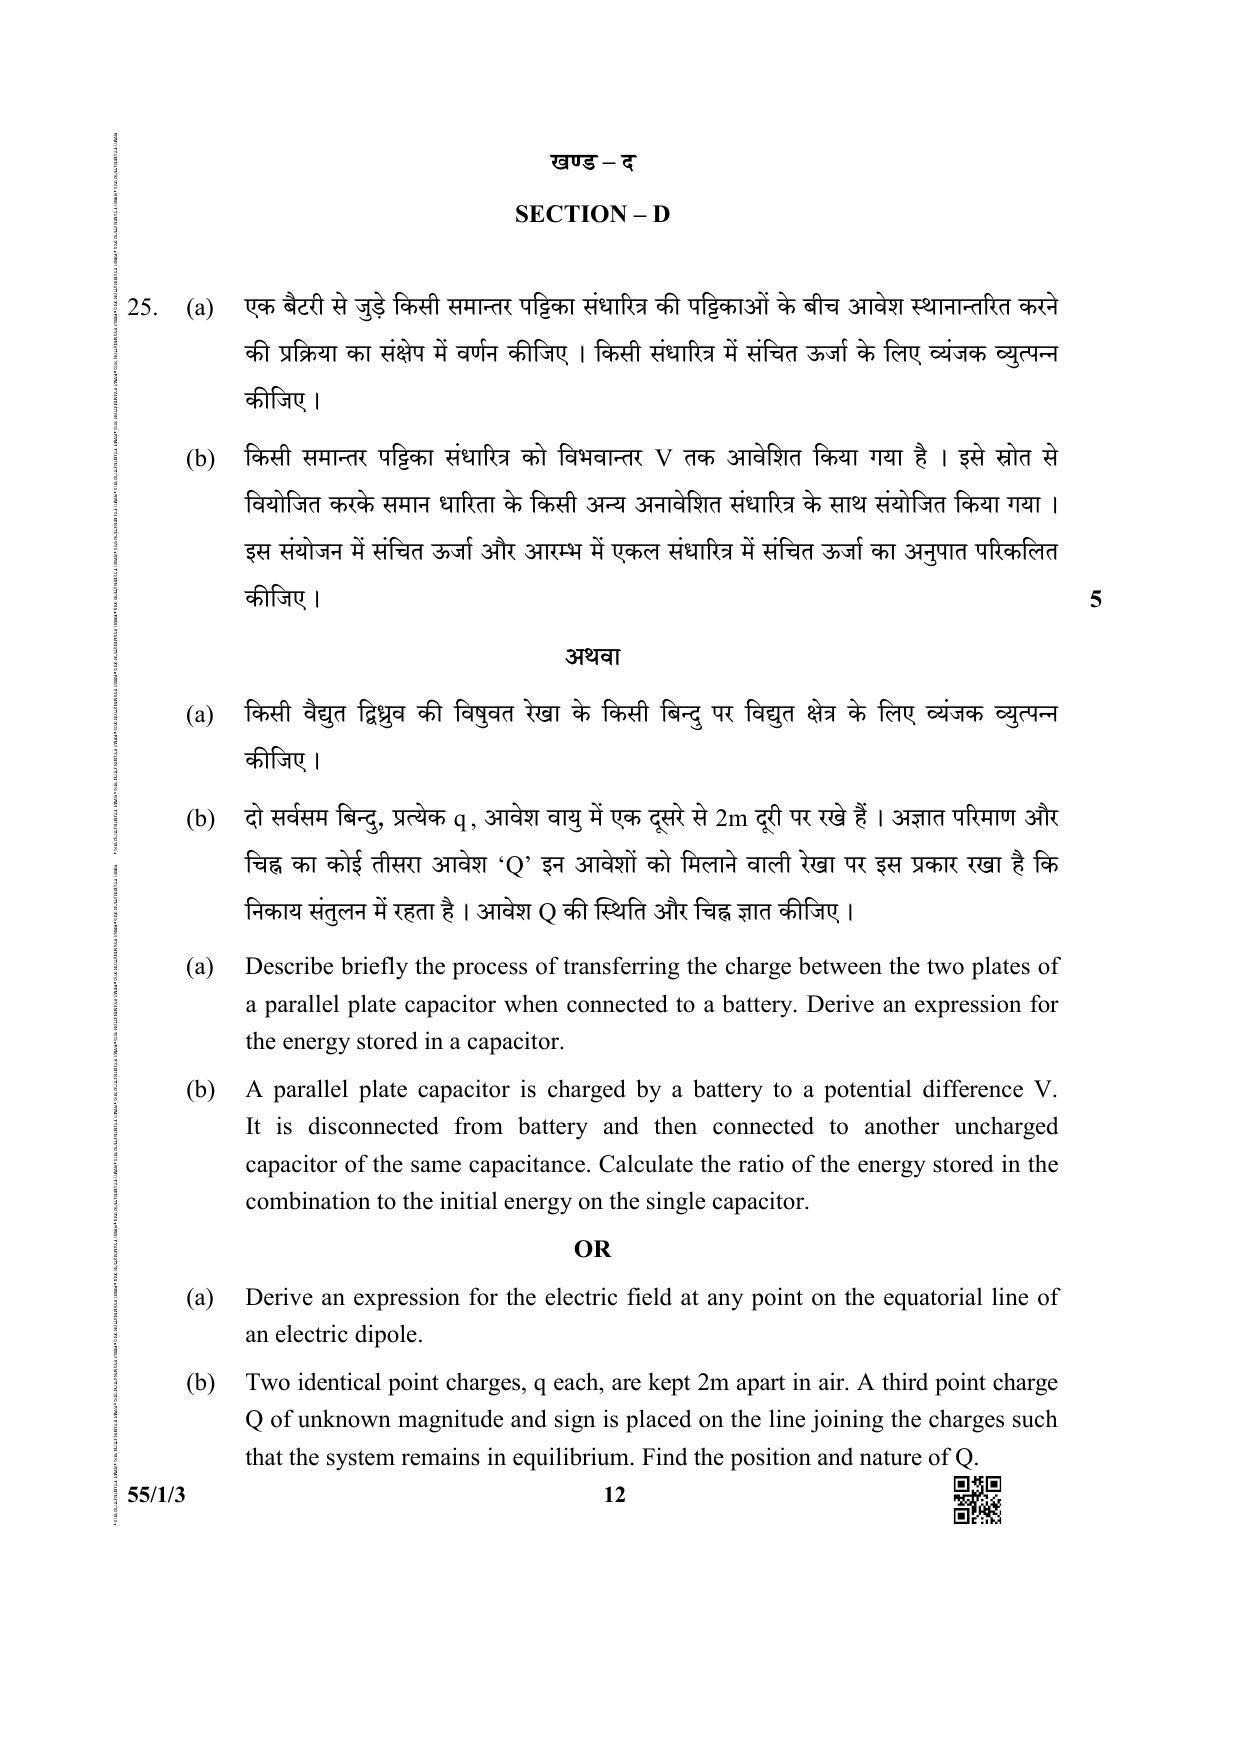 CBSE Class 12 55-1-3 (Physics) 2019 Question Paper - Page 12